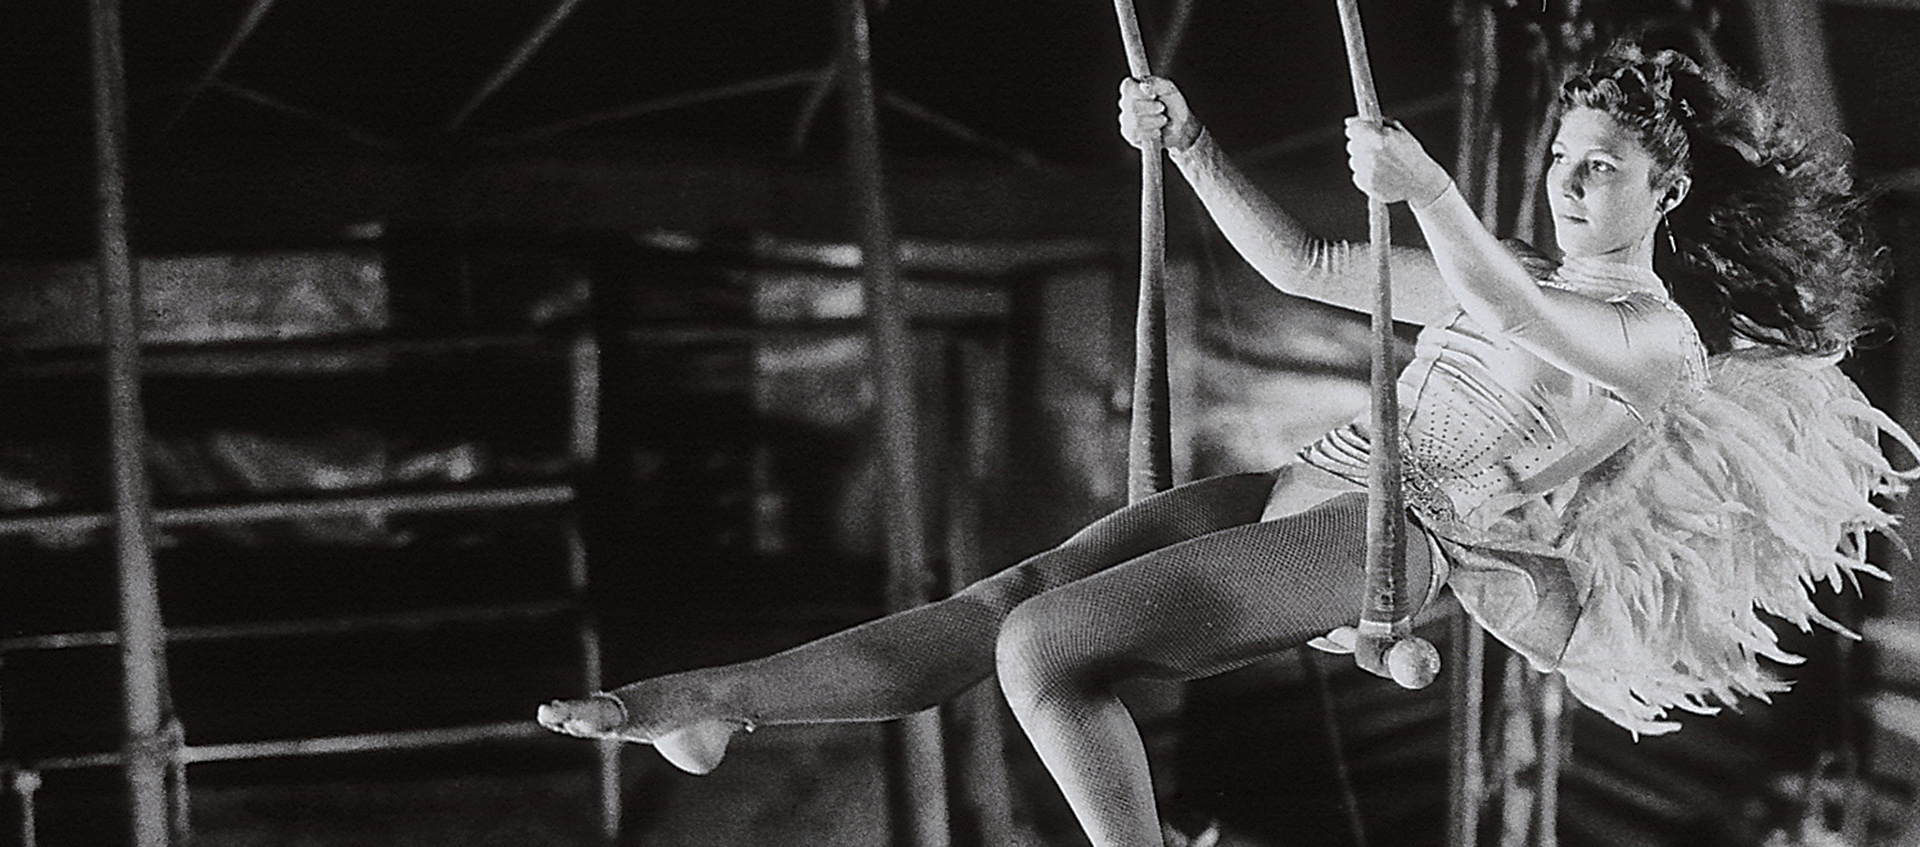 Actress Solveig Dommartin swings on a trapeze in an angel costume in a still from the 1987 Wim Wenders film Wings of Desire